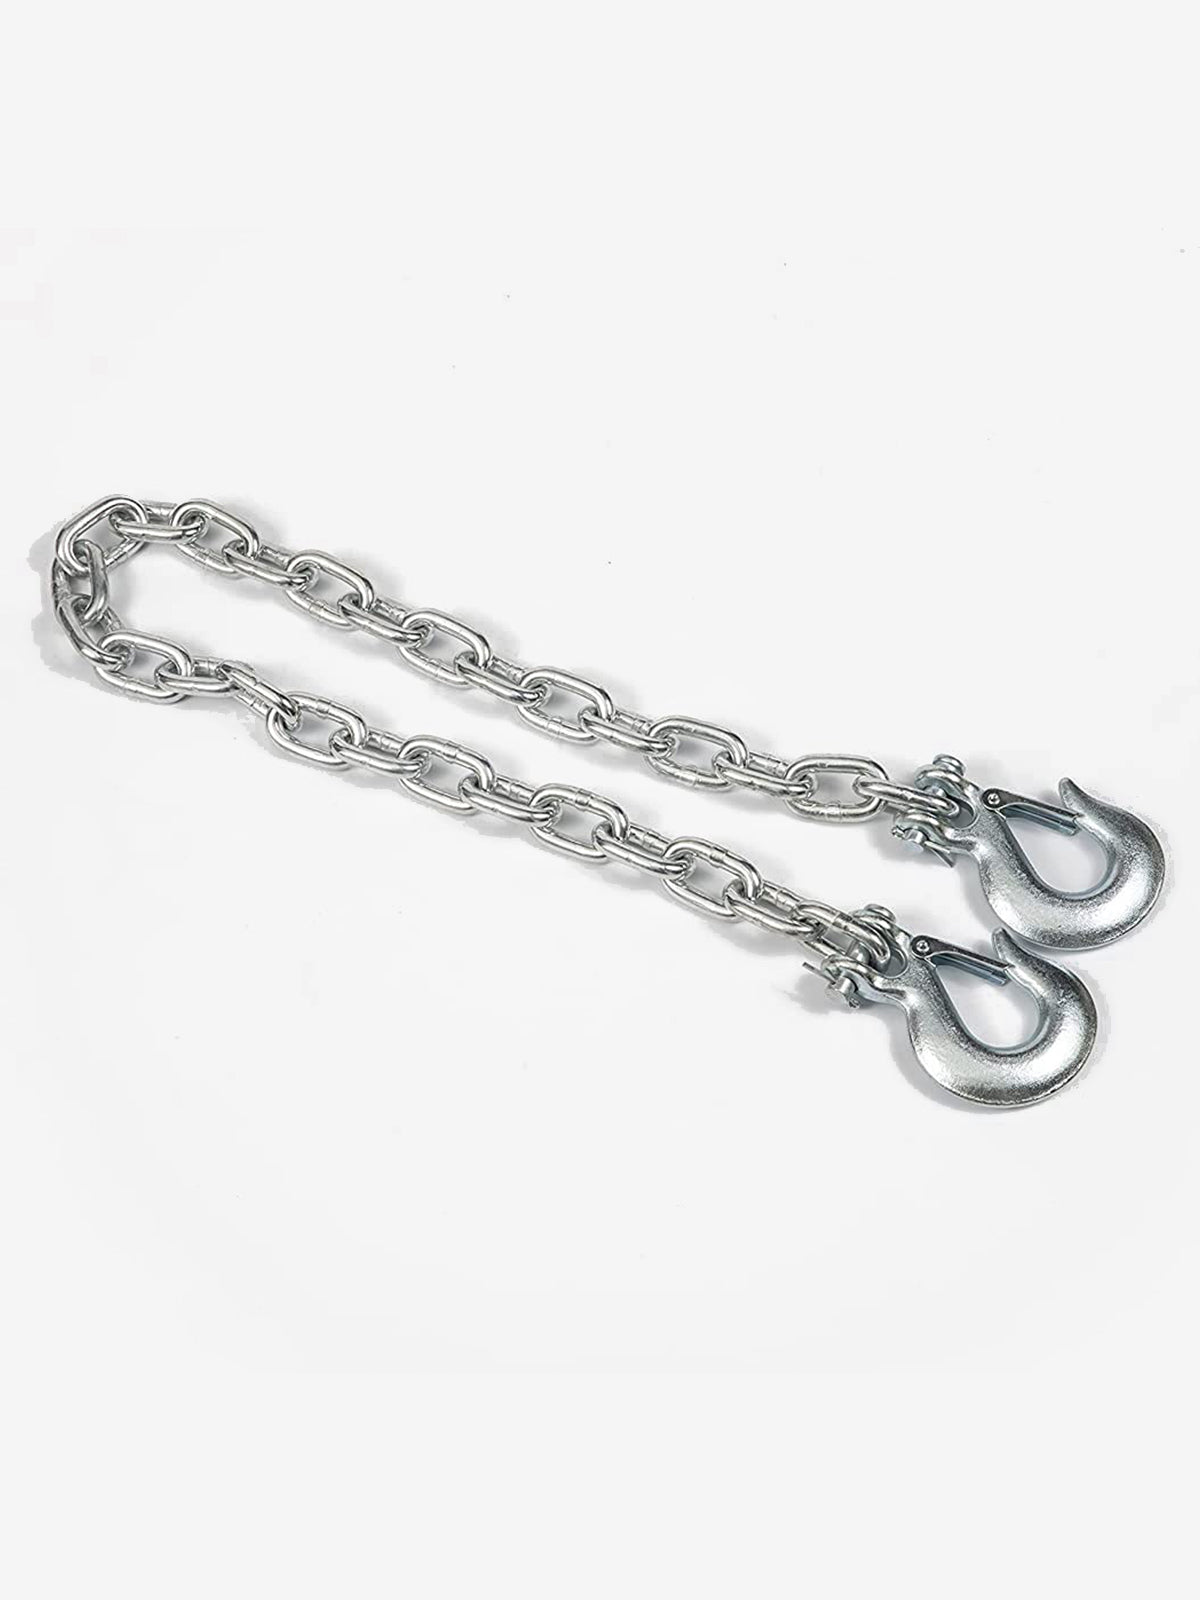 Safety Chain with Clevis Style Slip Hook (G43 3/8*35 - 2 per Box)